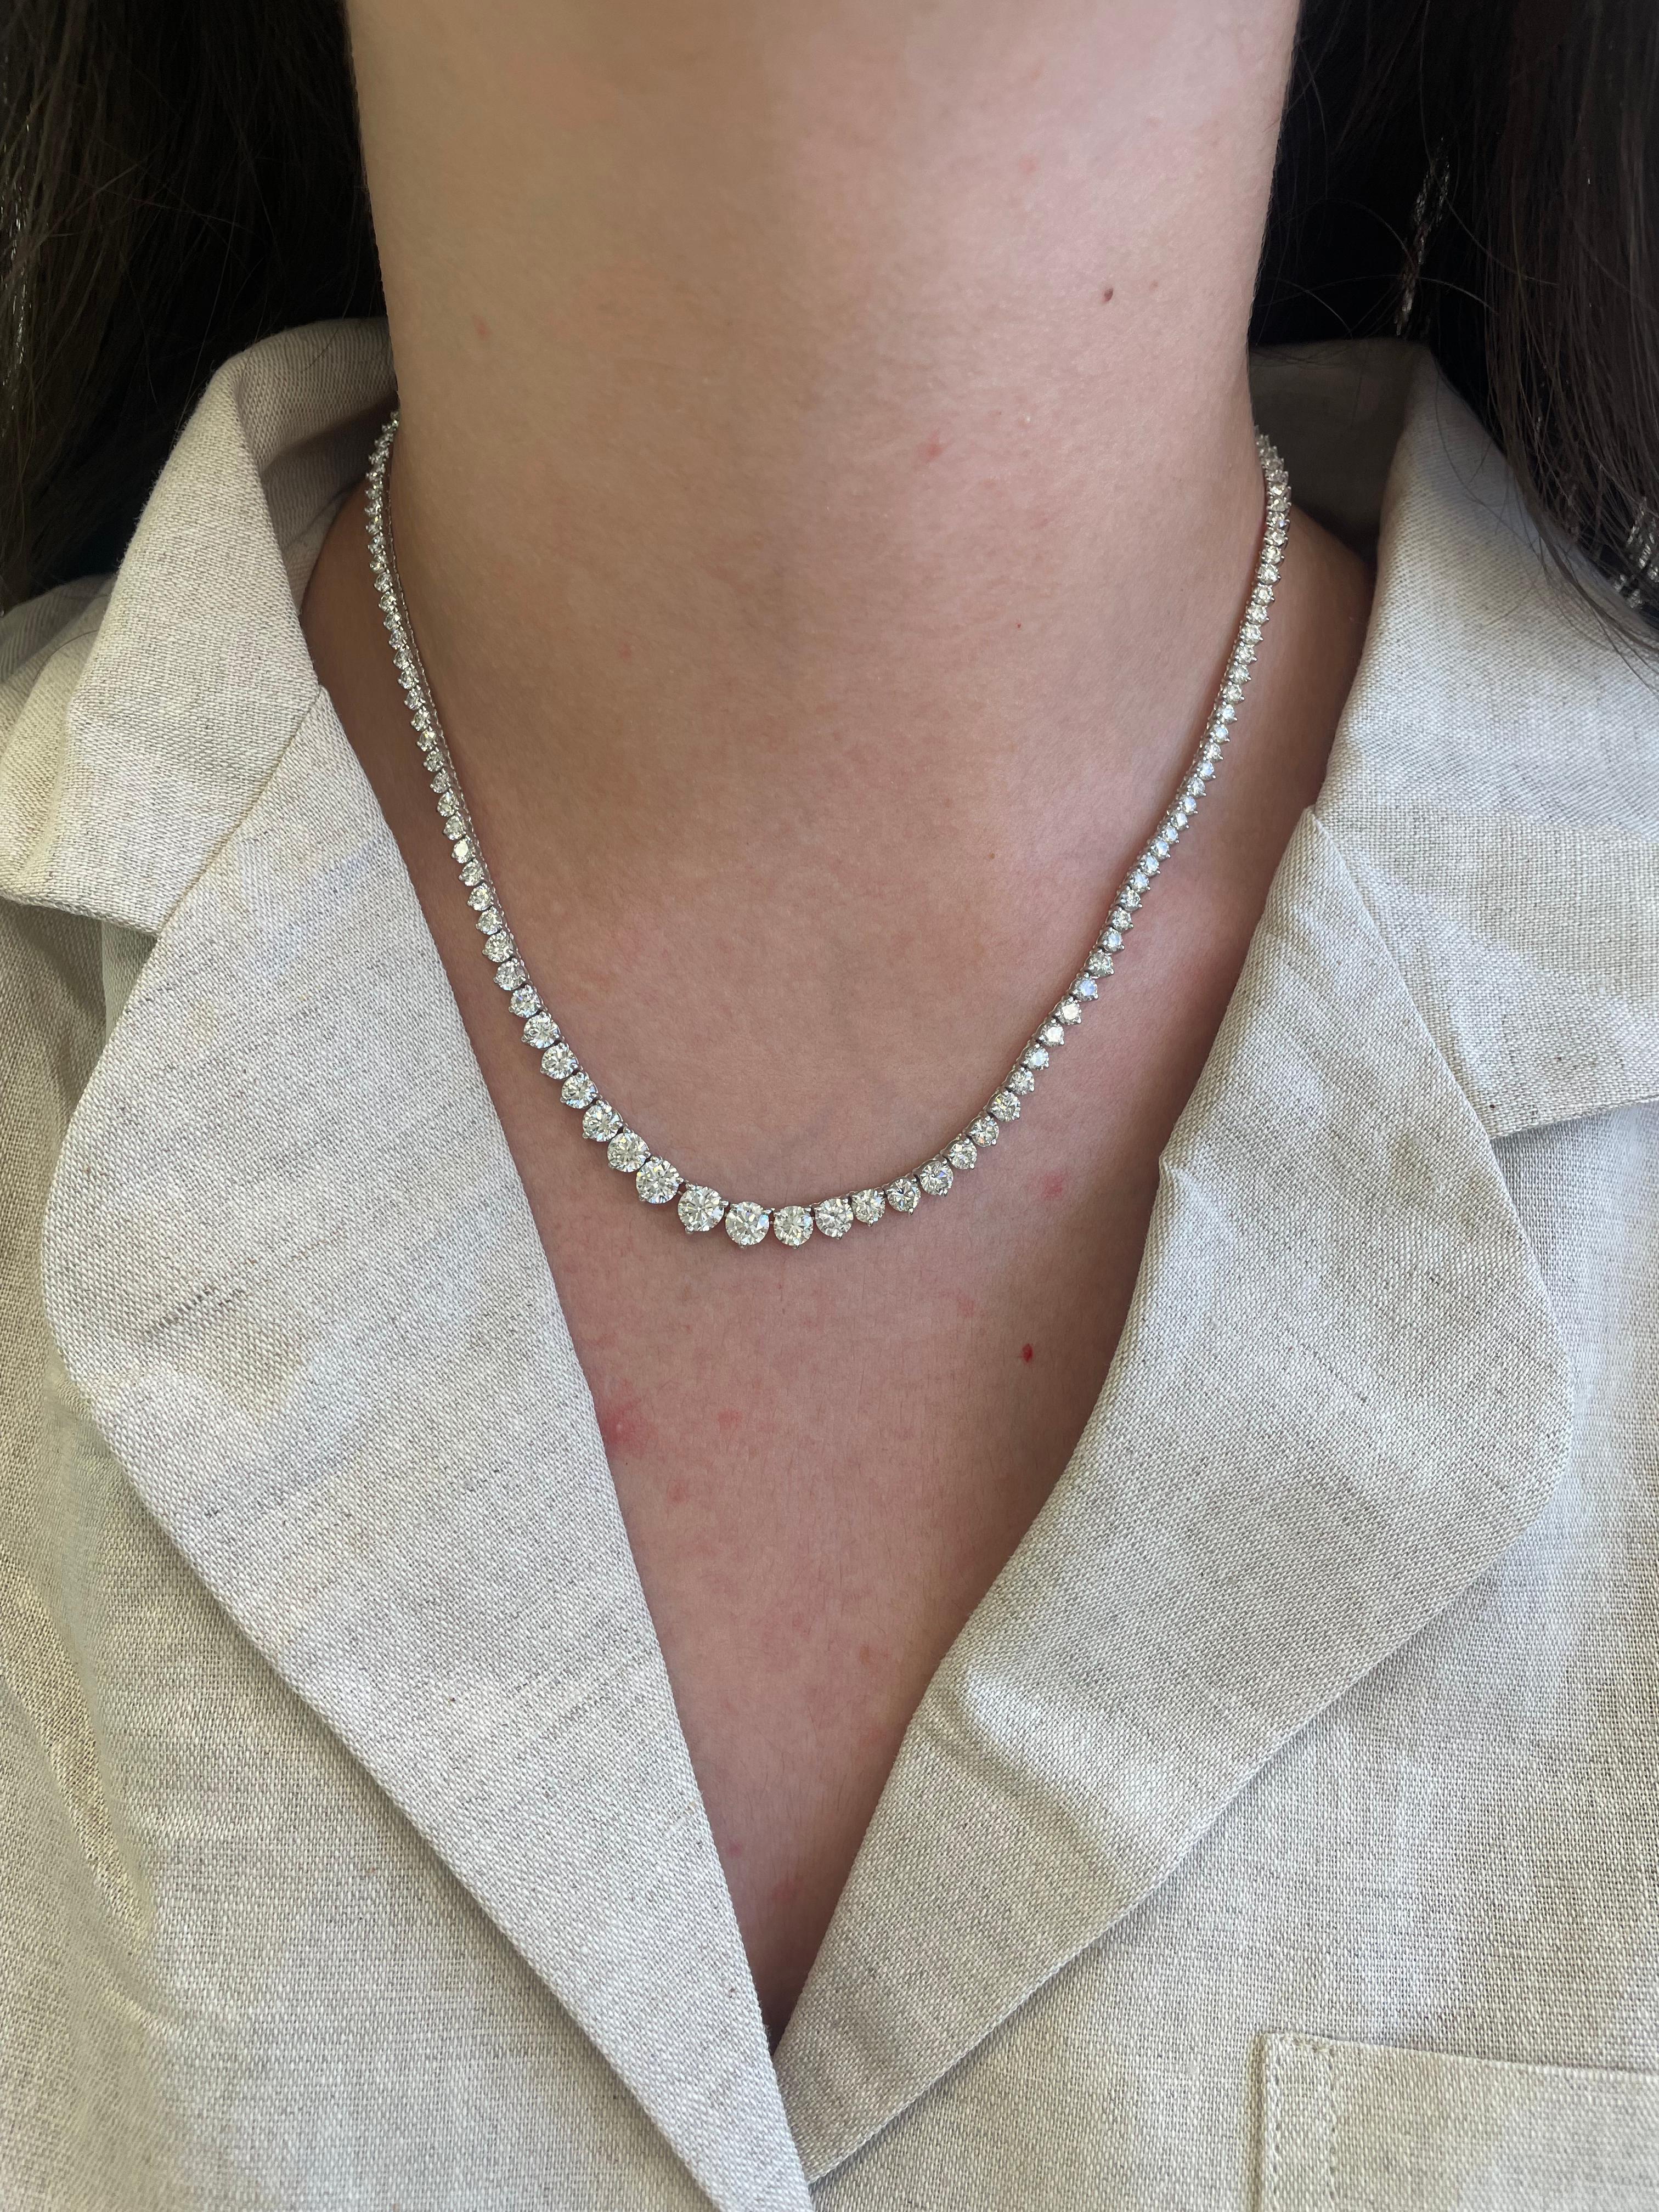 Beautiful and classic diamond tennis riviera necklace, GIA certified, by Alexander Beverly Hills.
133 round brilliant diamonds, 14.52 carats. Approximately H-J color and VVS1-VS2 clarity. Three prong, 18k white gold, 18.42 grams, 16In.
Accommodated